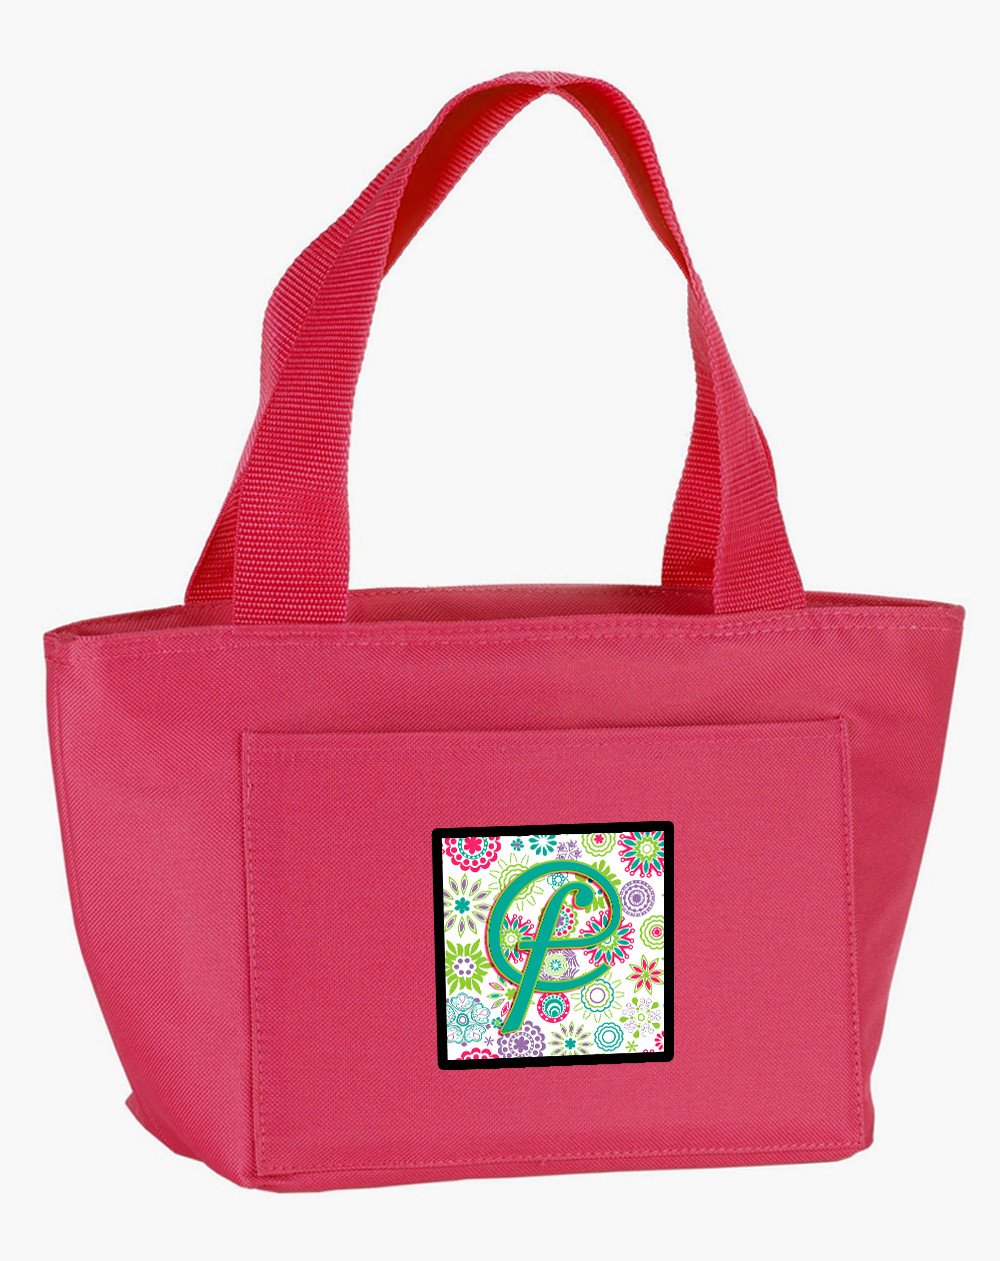 Letter F Flowers Pink Teal Green Initial Lunch Bag CJ2011-FPK-8808 by Caroline's Treasures